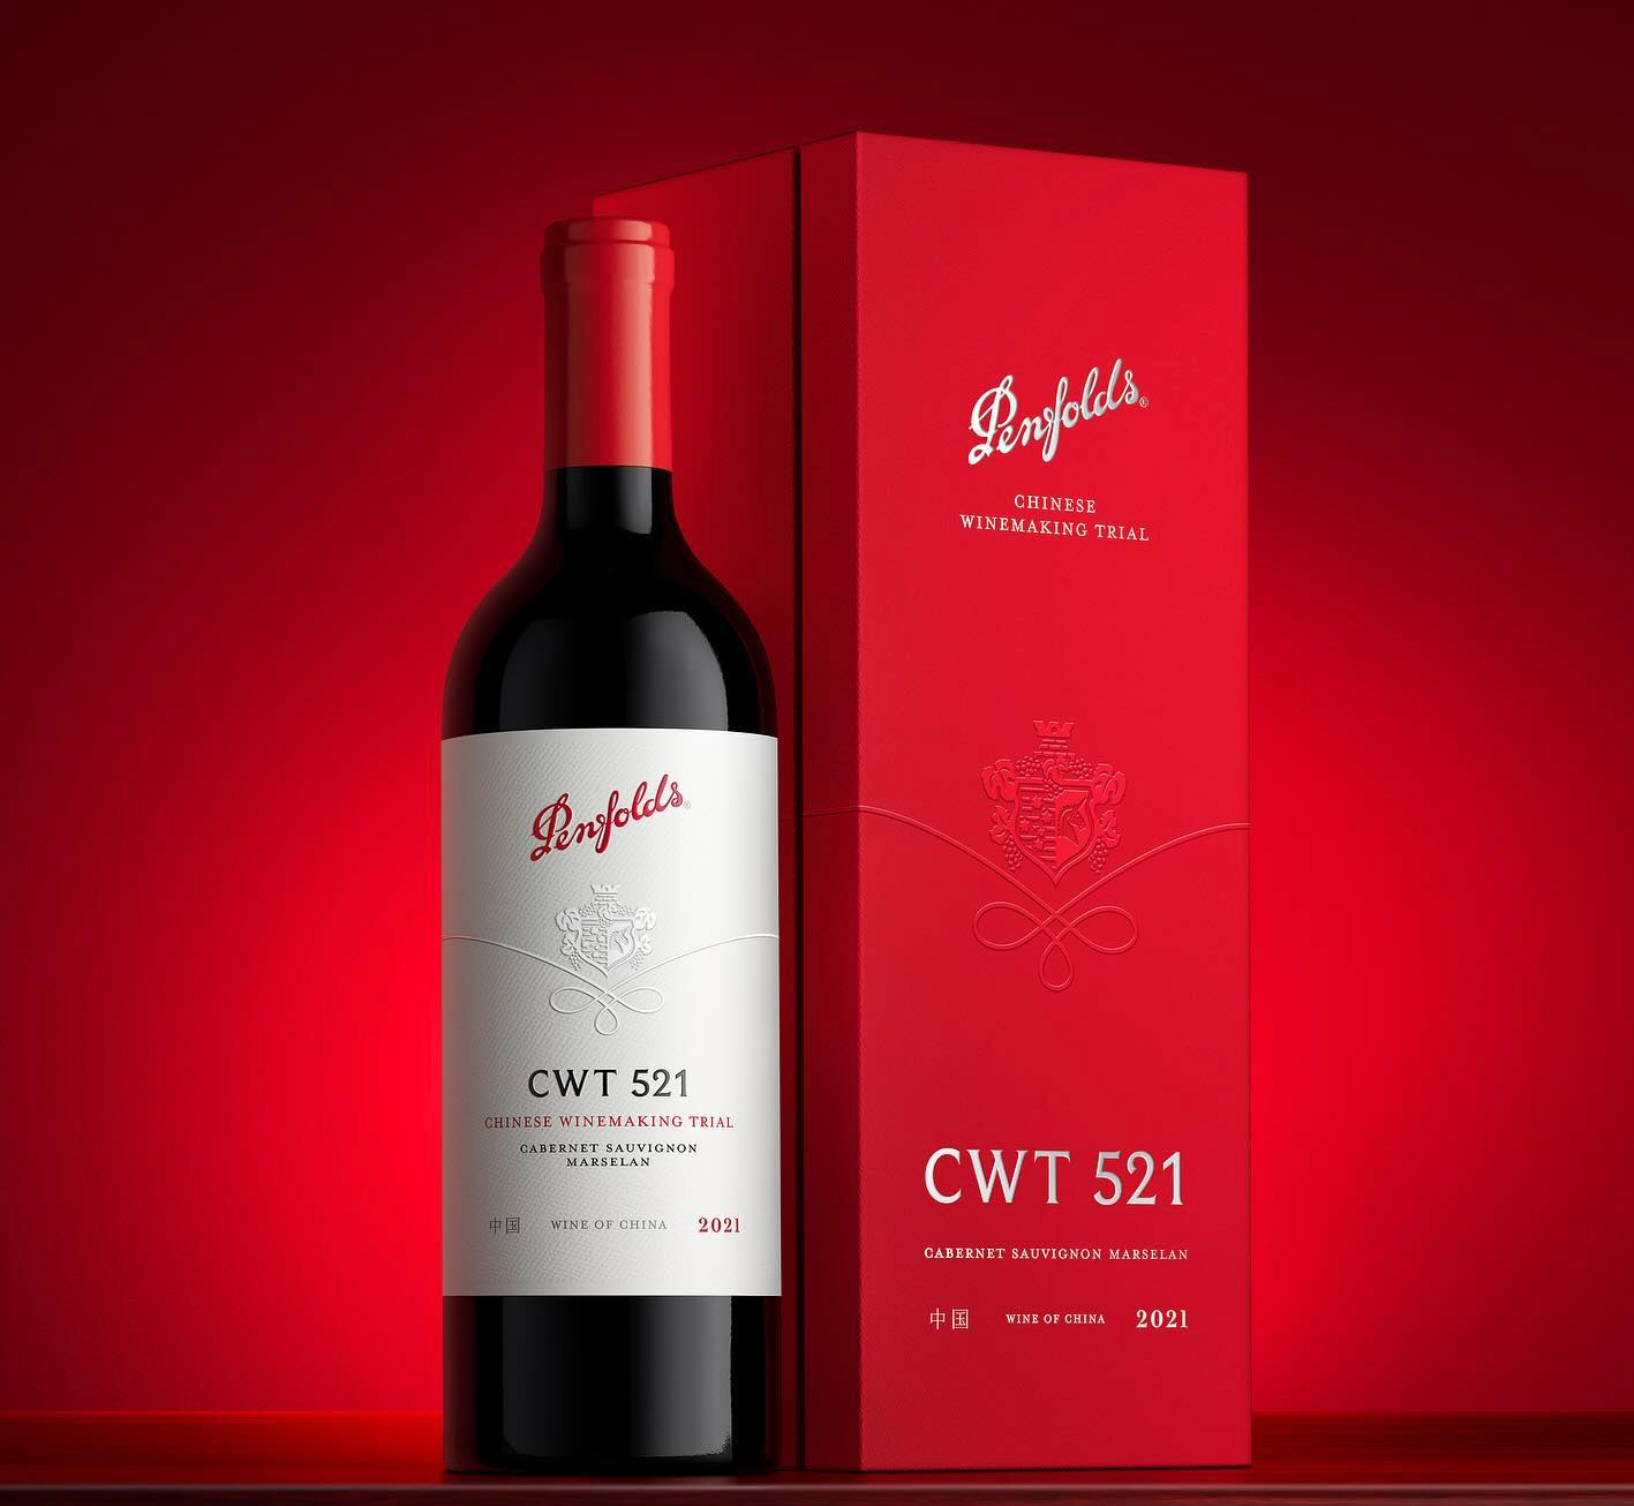 Penfolds CWT 521, a Yunnan-Ningxia blend, remains elusive outside of China and Australia. Image: Penfolds